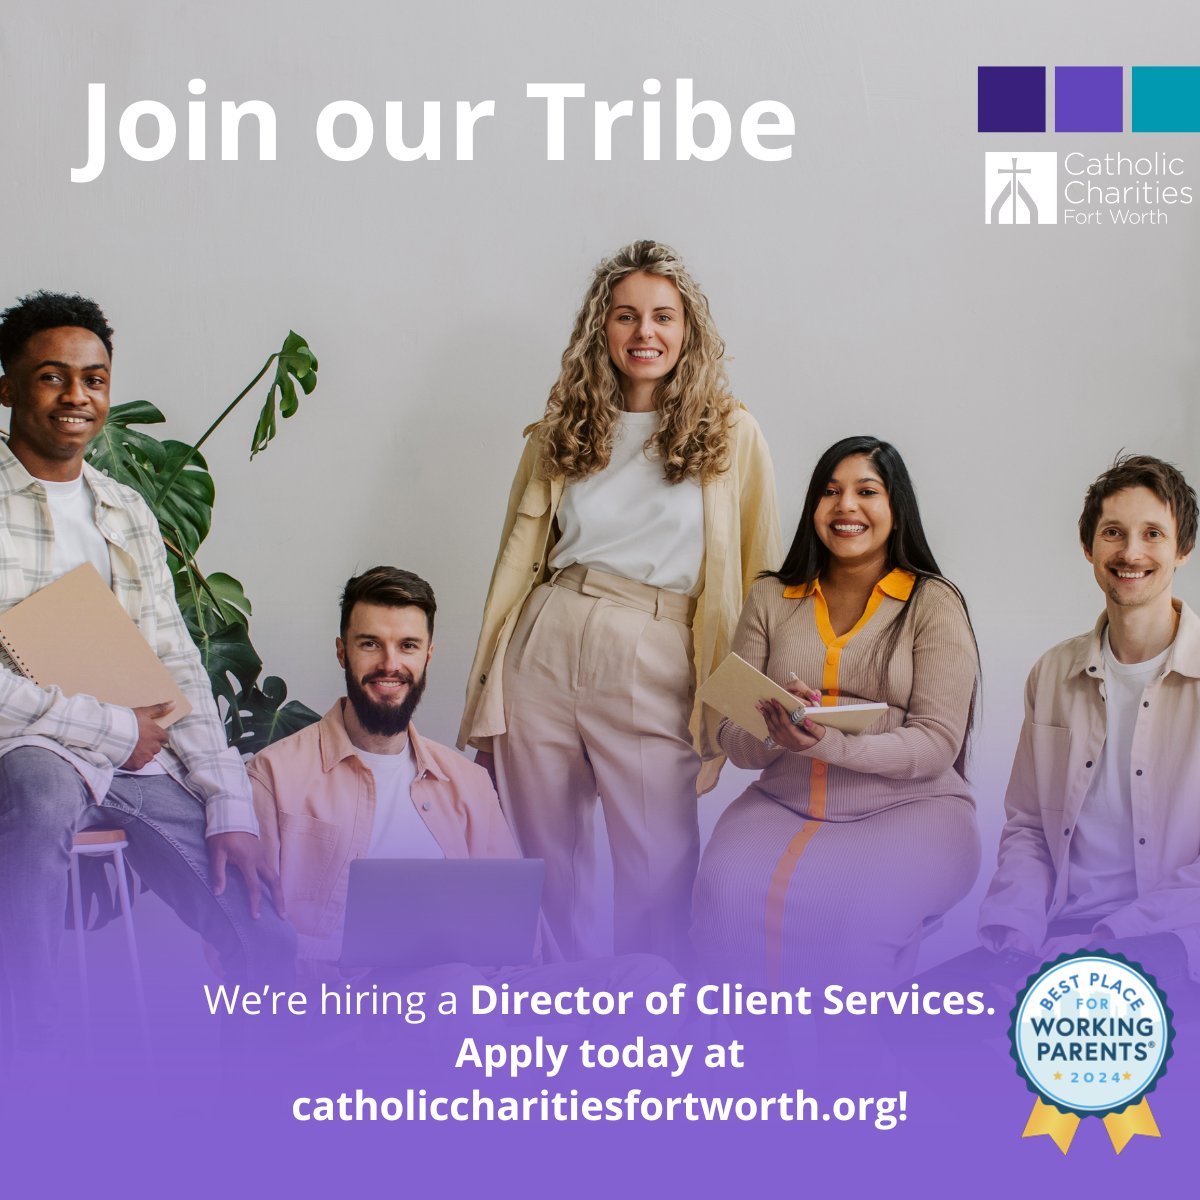 #ApplyToday 🌟 Join our tribe! We're on the lookout for a Director of Client Services to lead the way in delivering exceptional experiences. Apply now: ow.ly/czsP50RnlcE #NowHiring #OneTribe #CCFW #Share